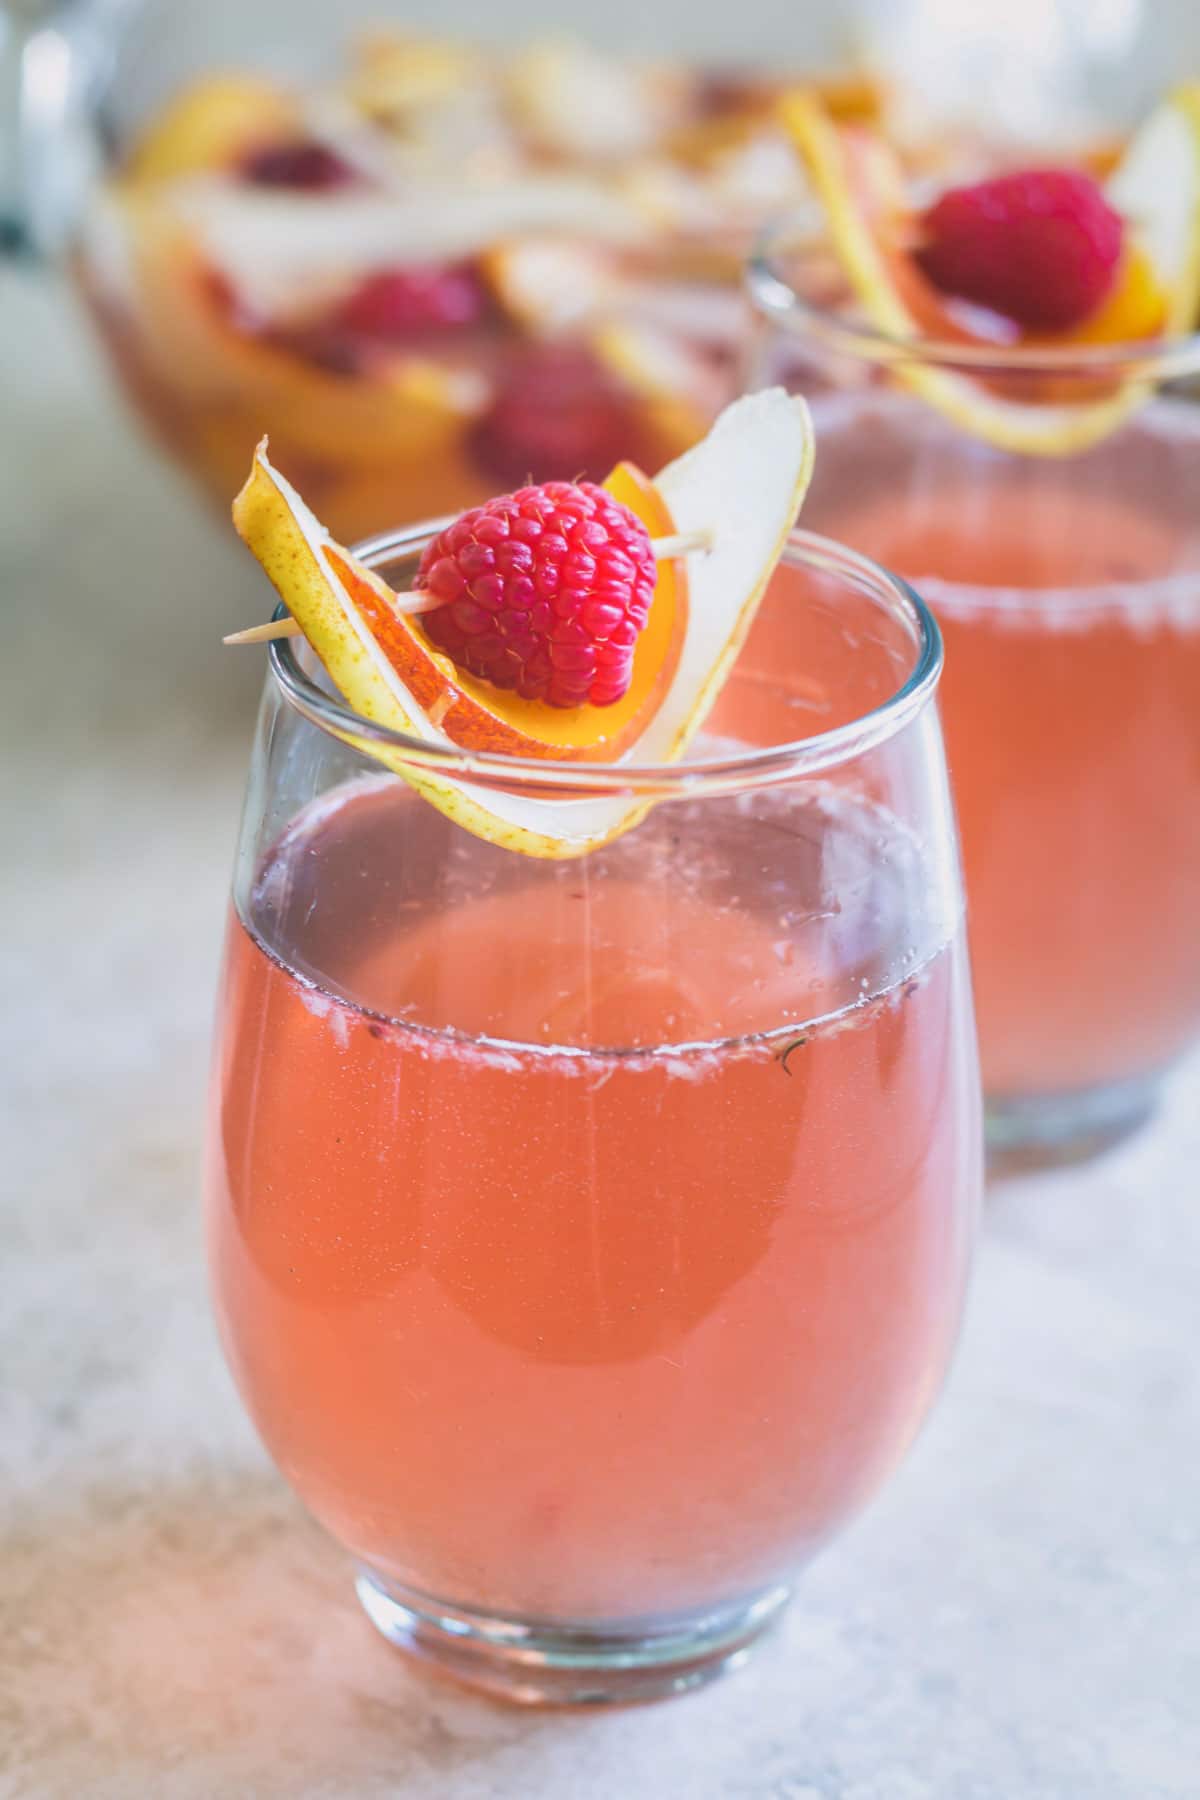 A glass of rose sangria garnished with slices of pear and peach and a raspberry.